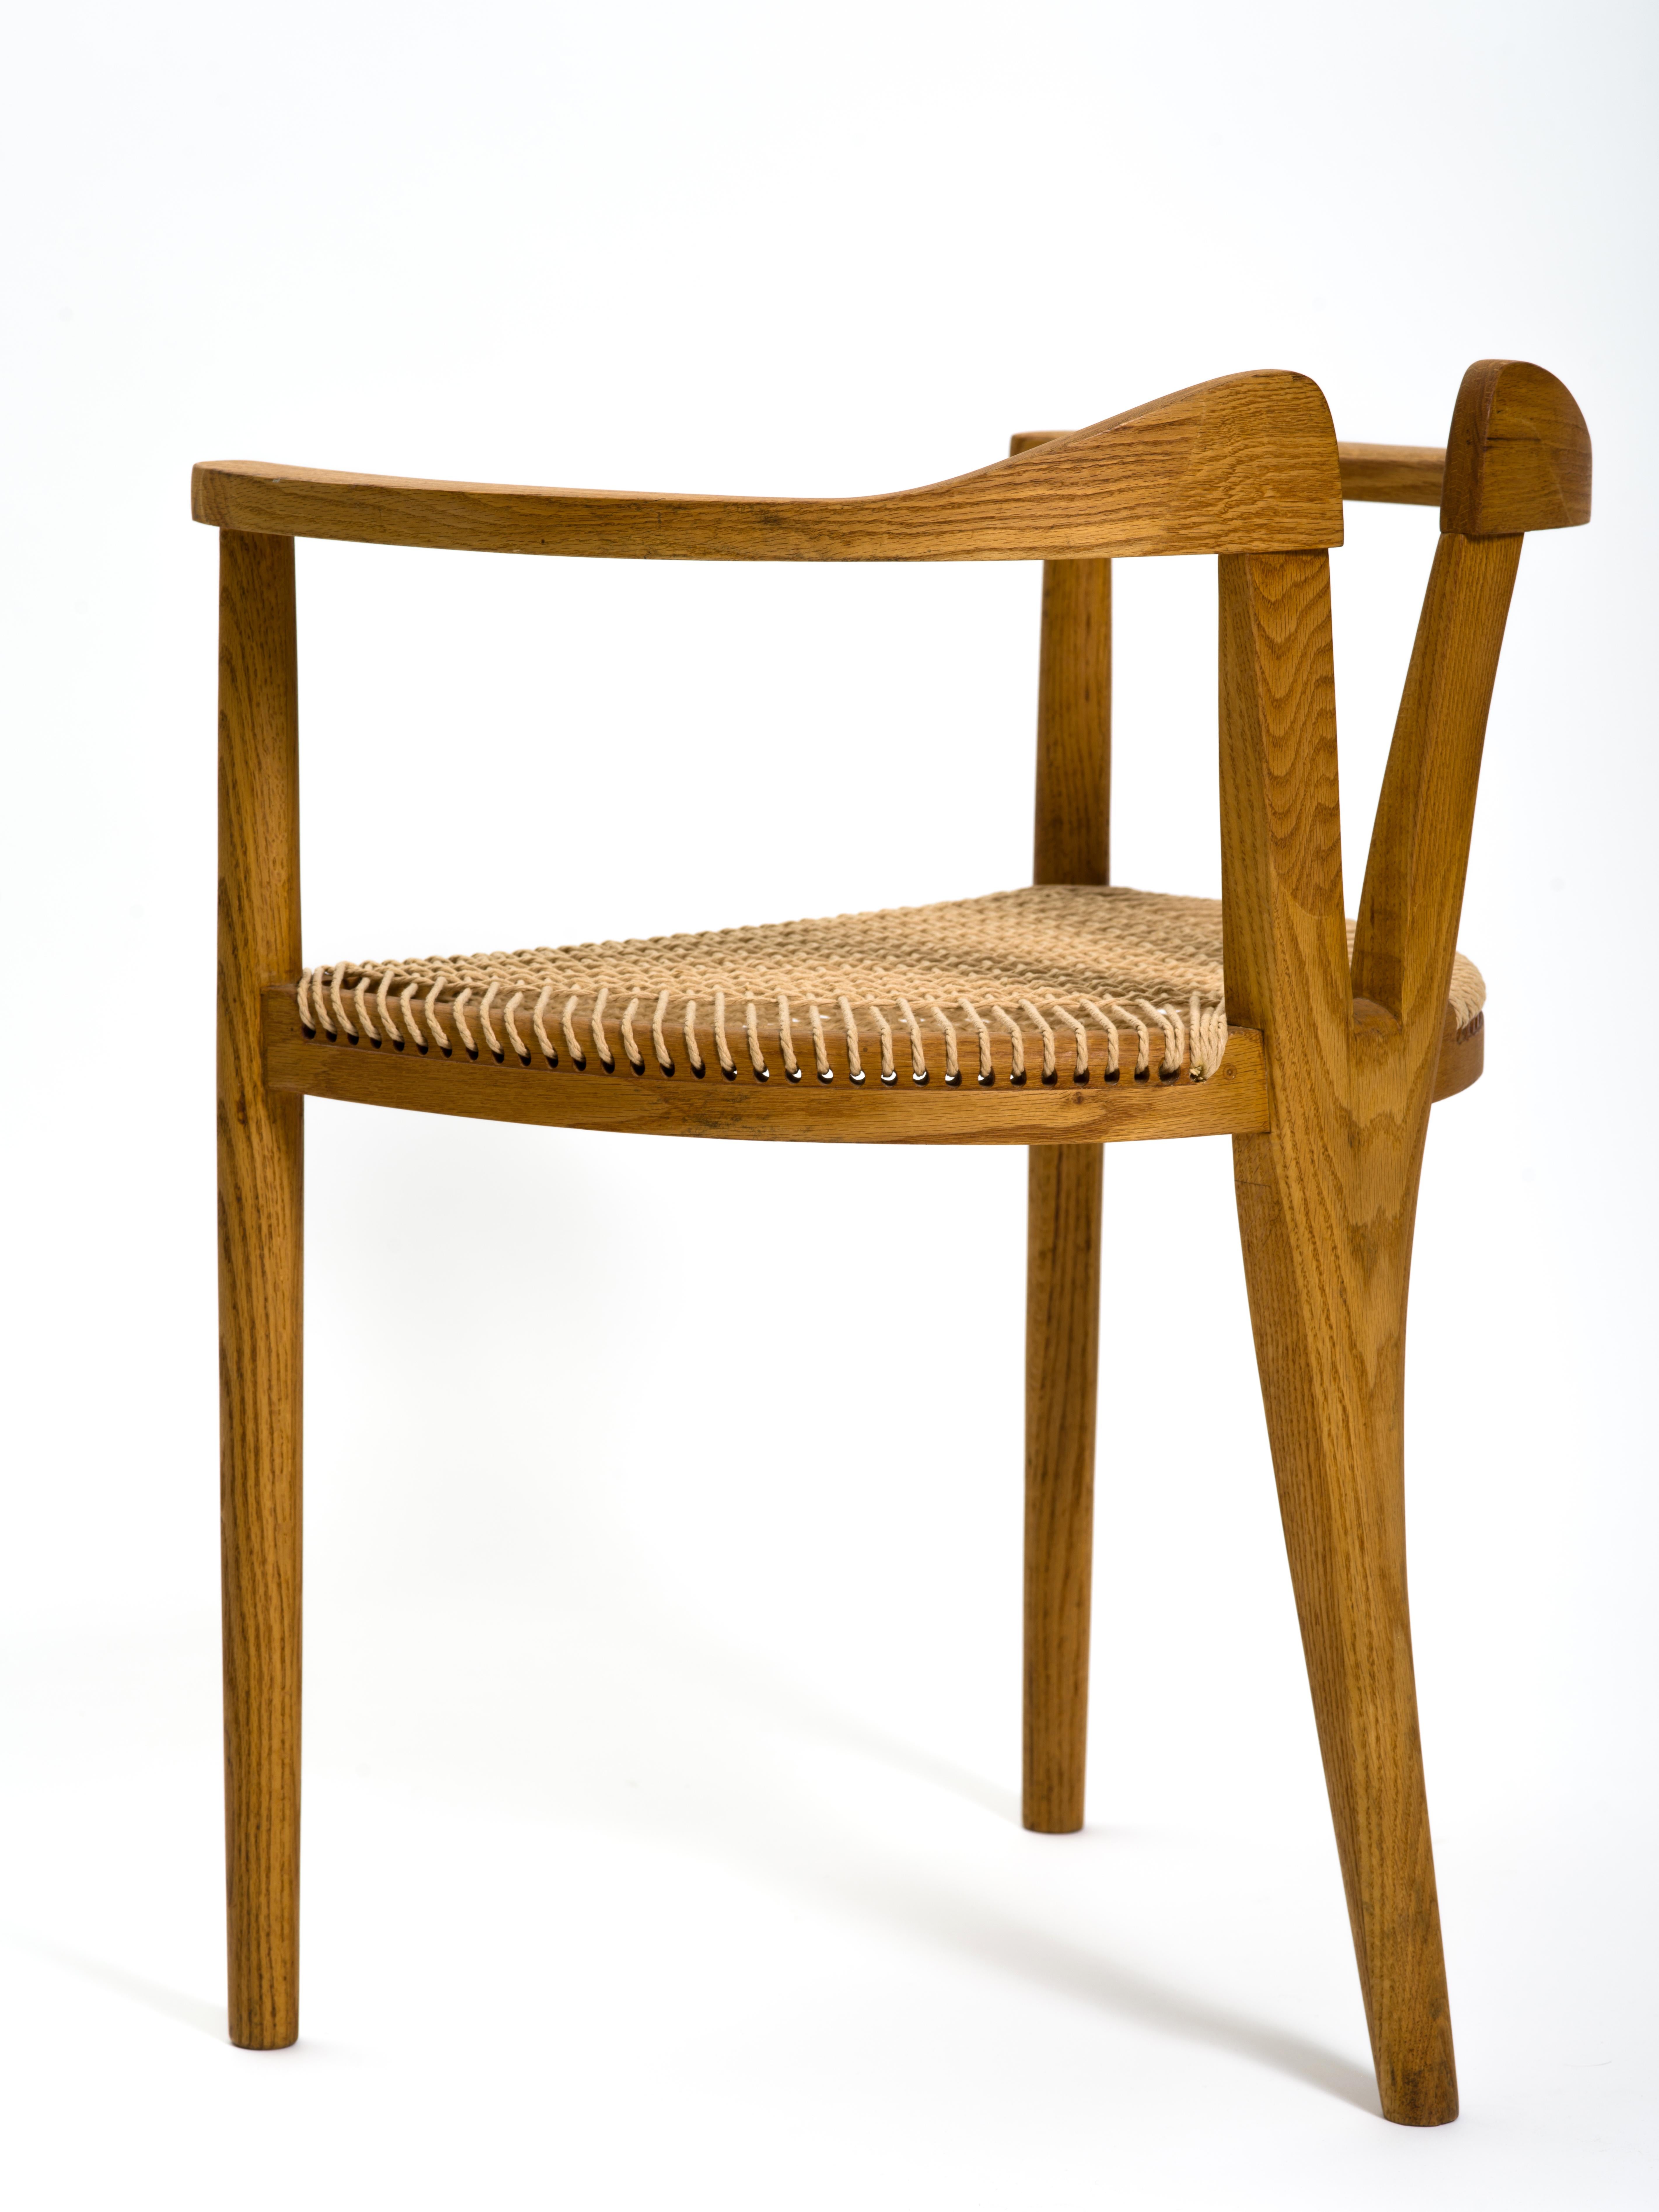 American Studio Craft Tri-Leg Chair in Oak with Woven Seat after Hans Wegner 1